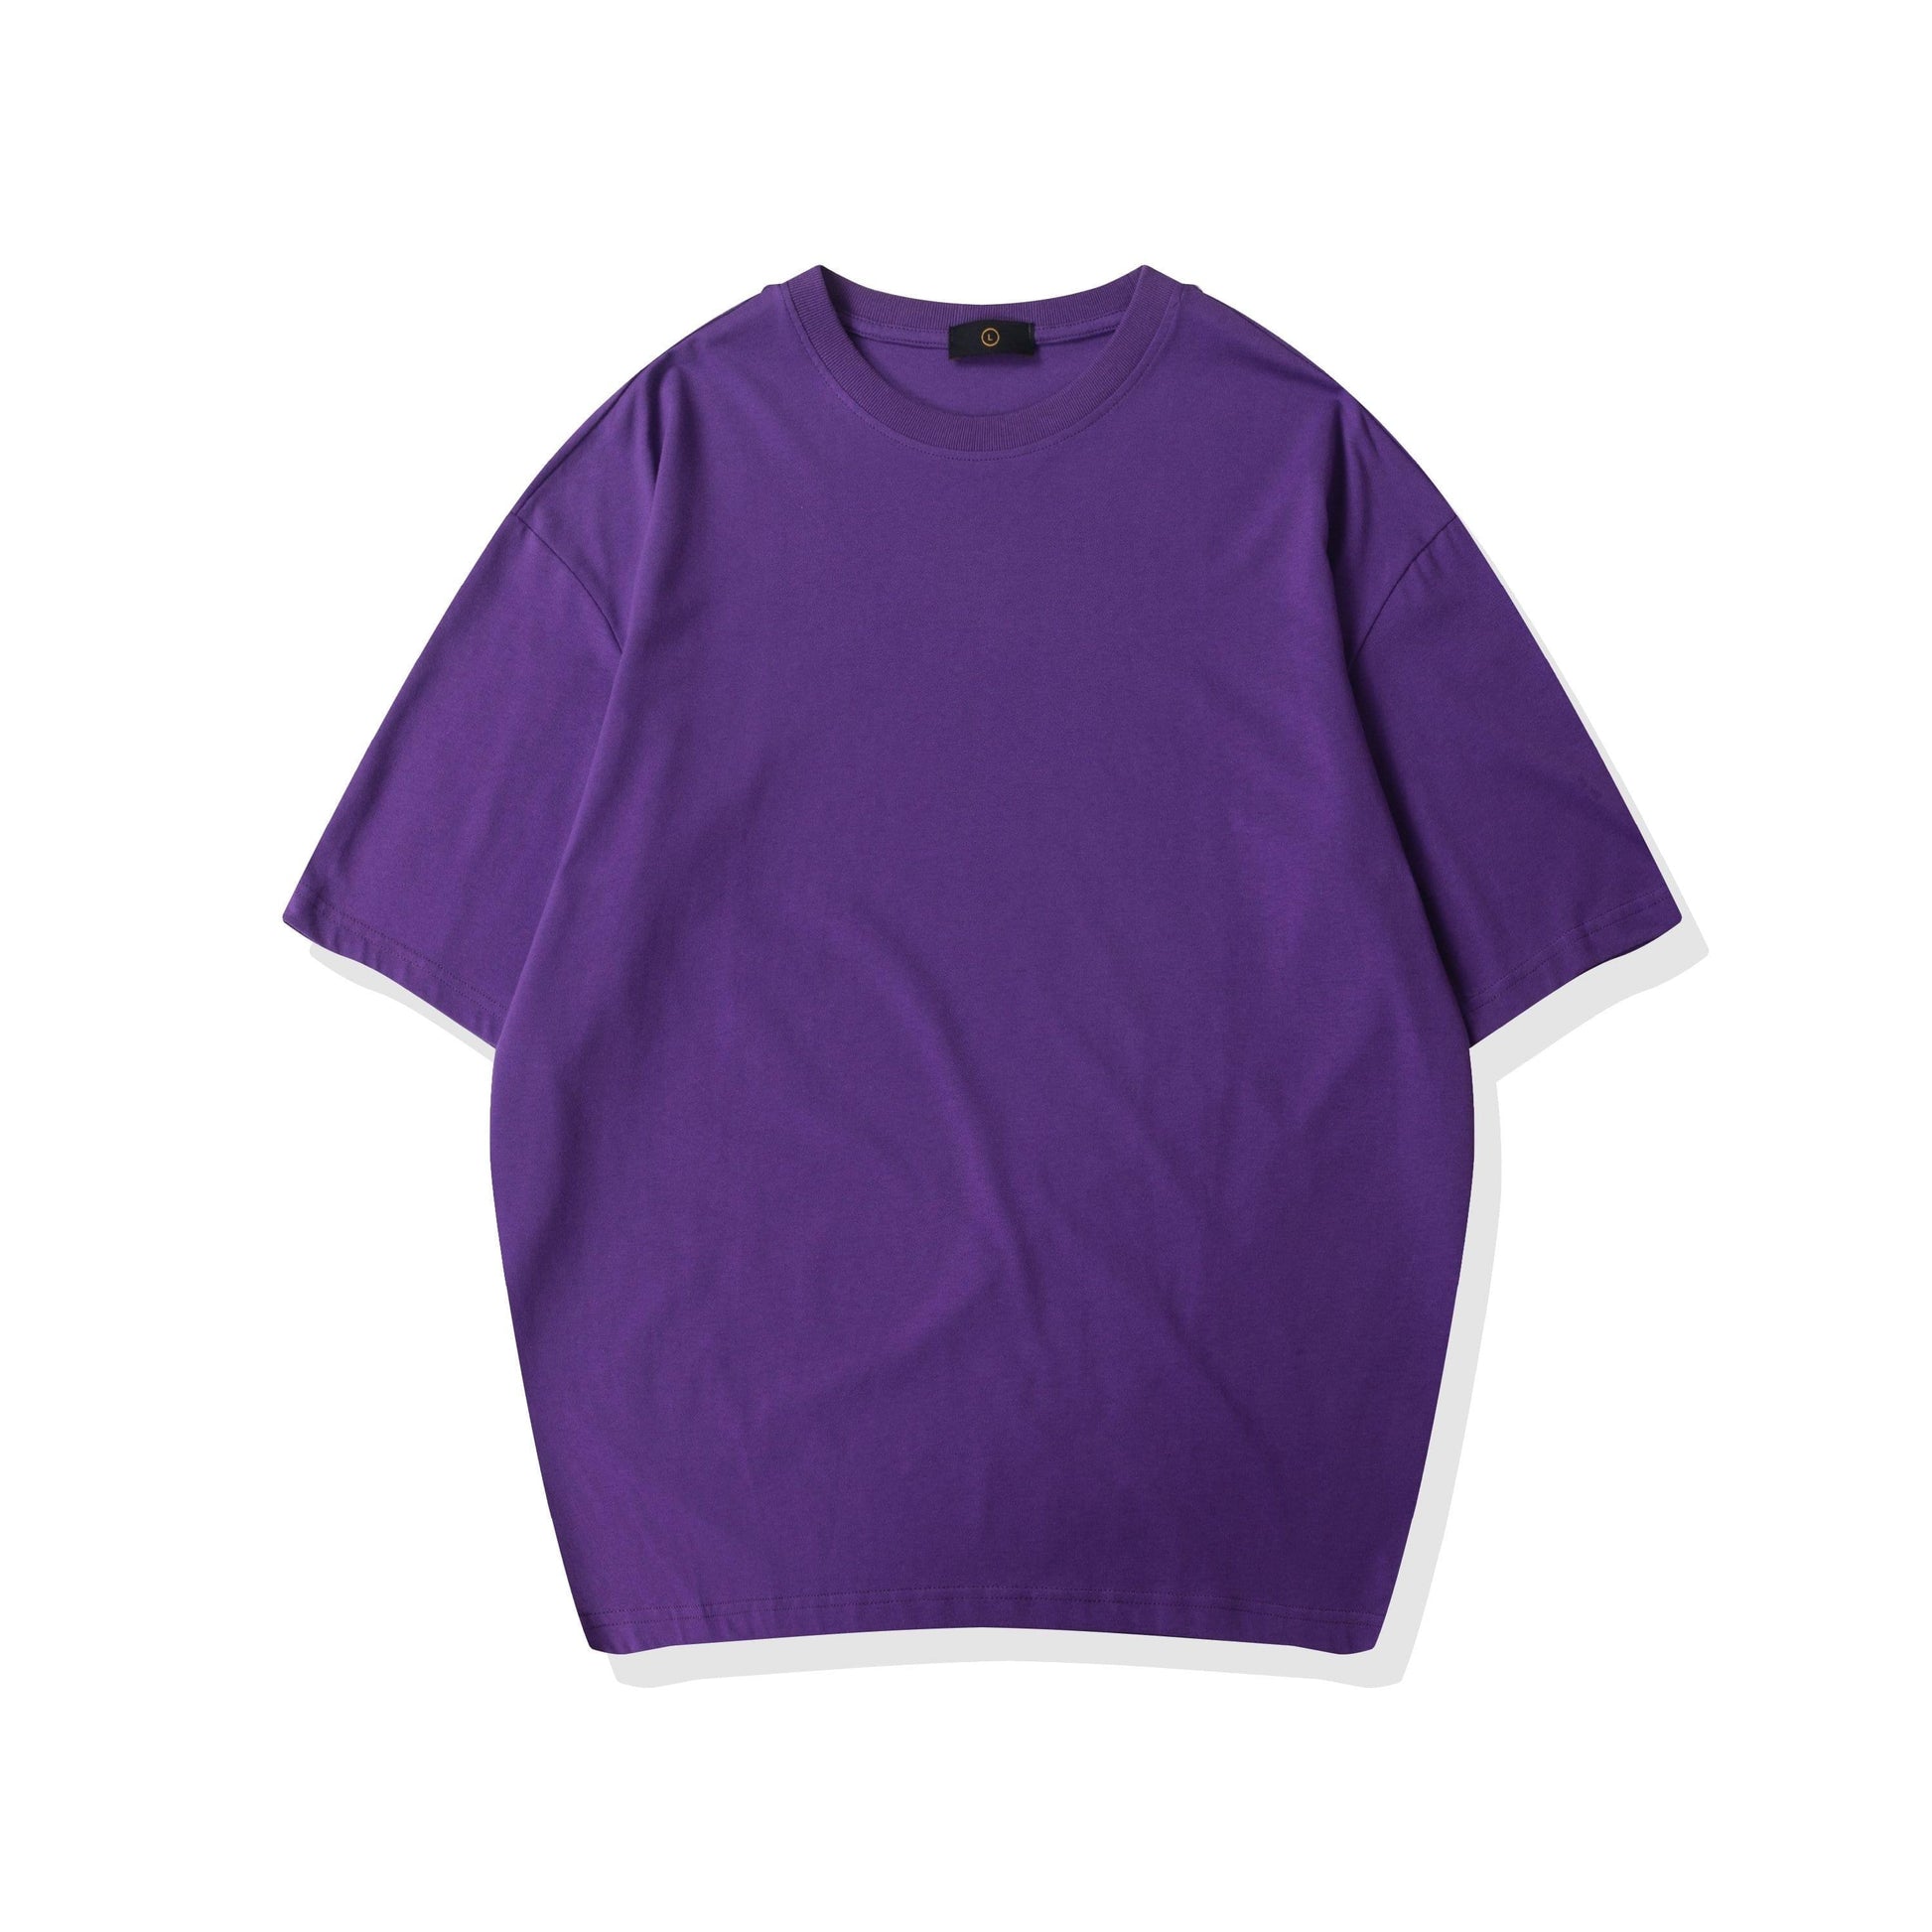 ezy2find T Shirt Purple / S Solid color short-sleeved T-shirt bottoming shirt